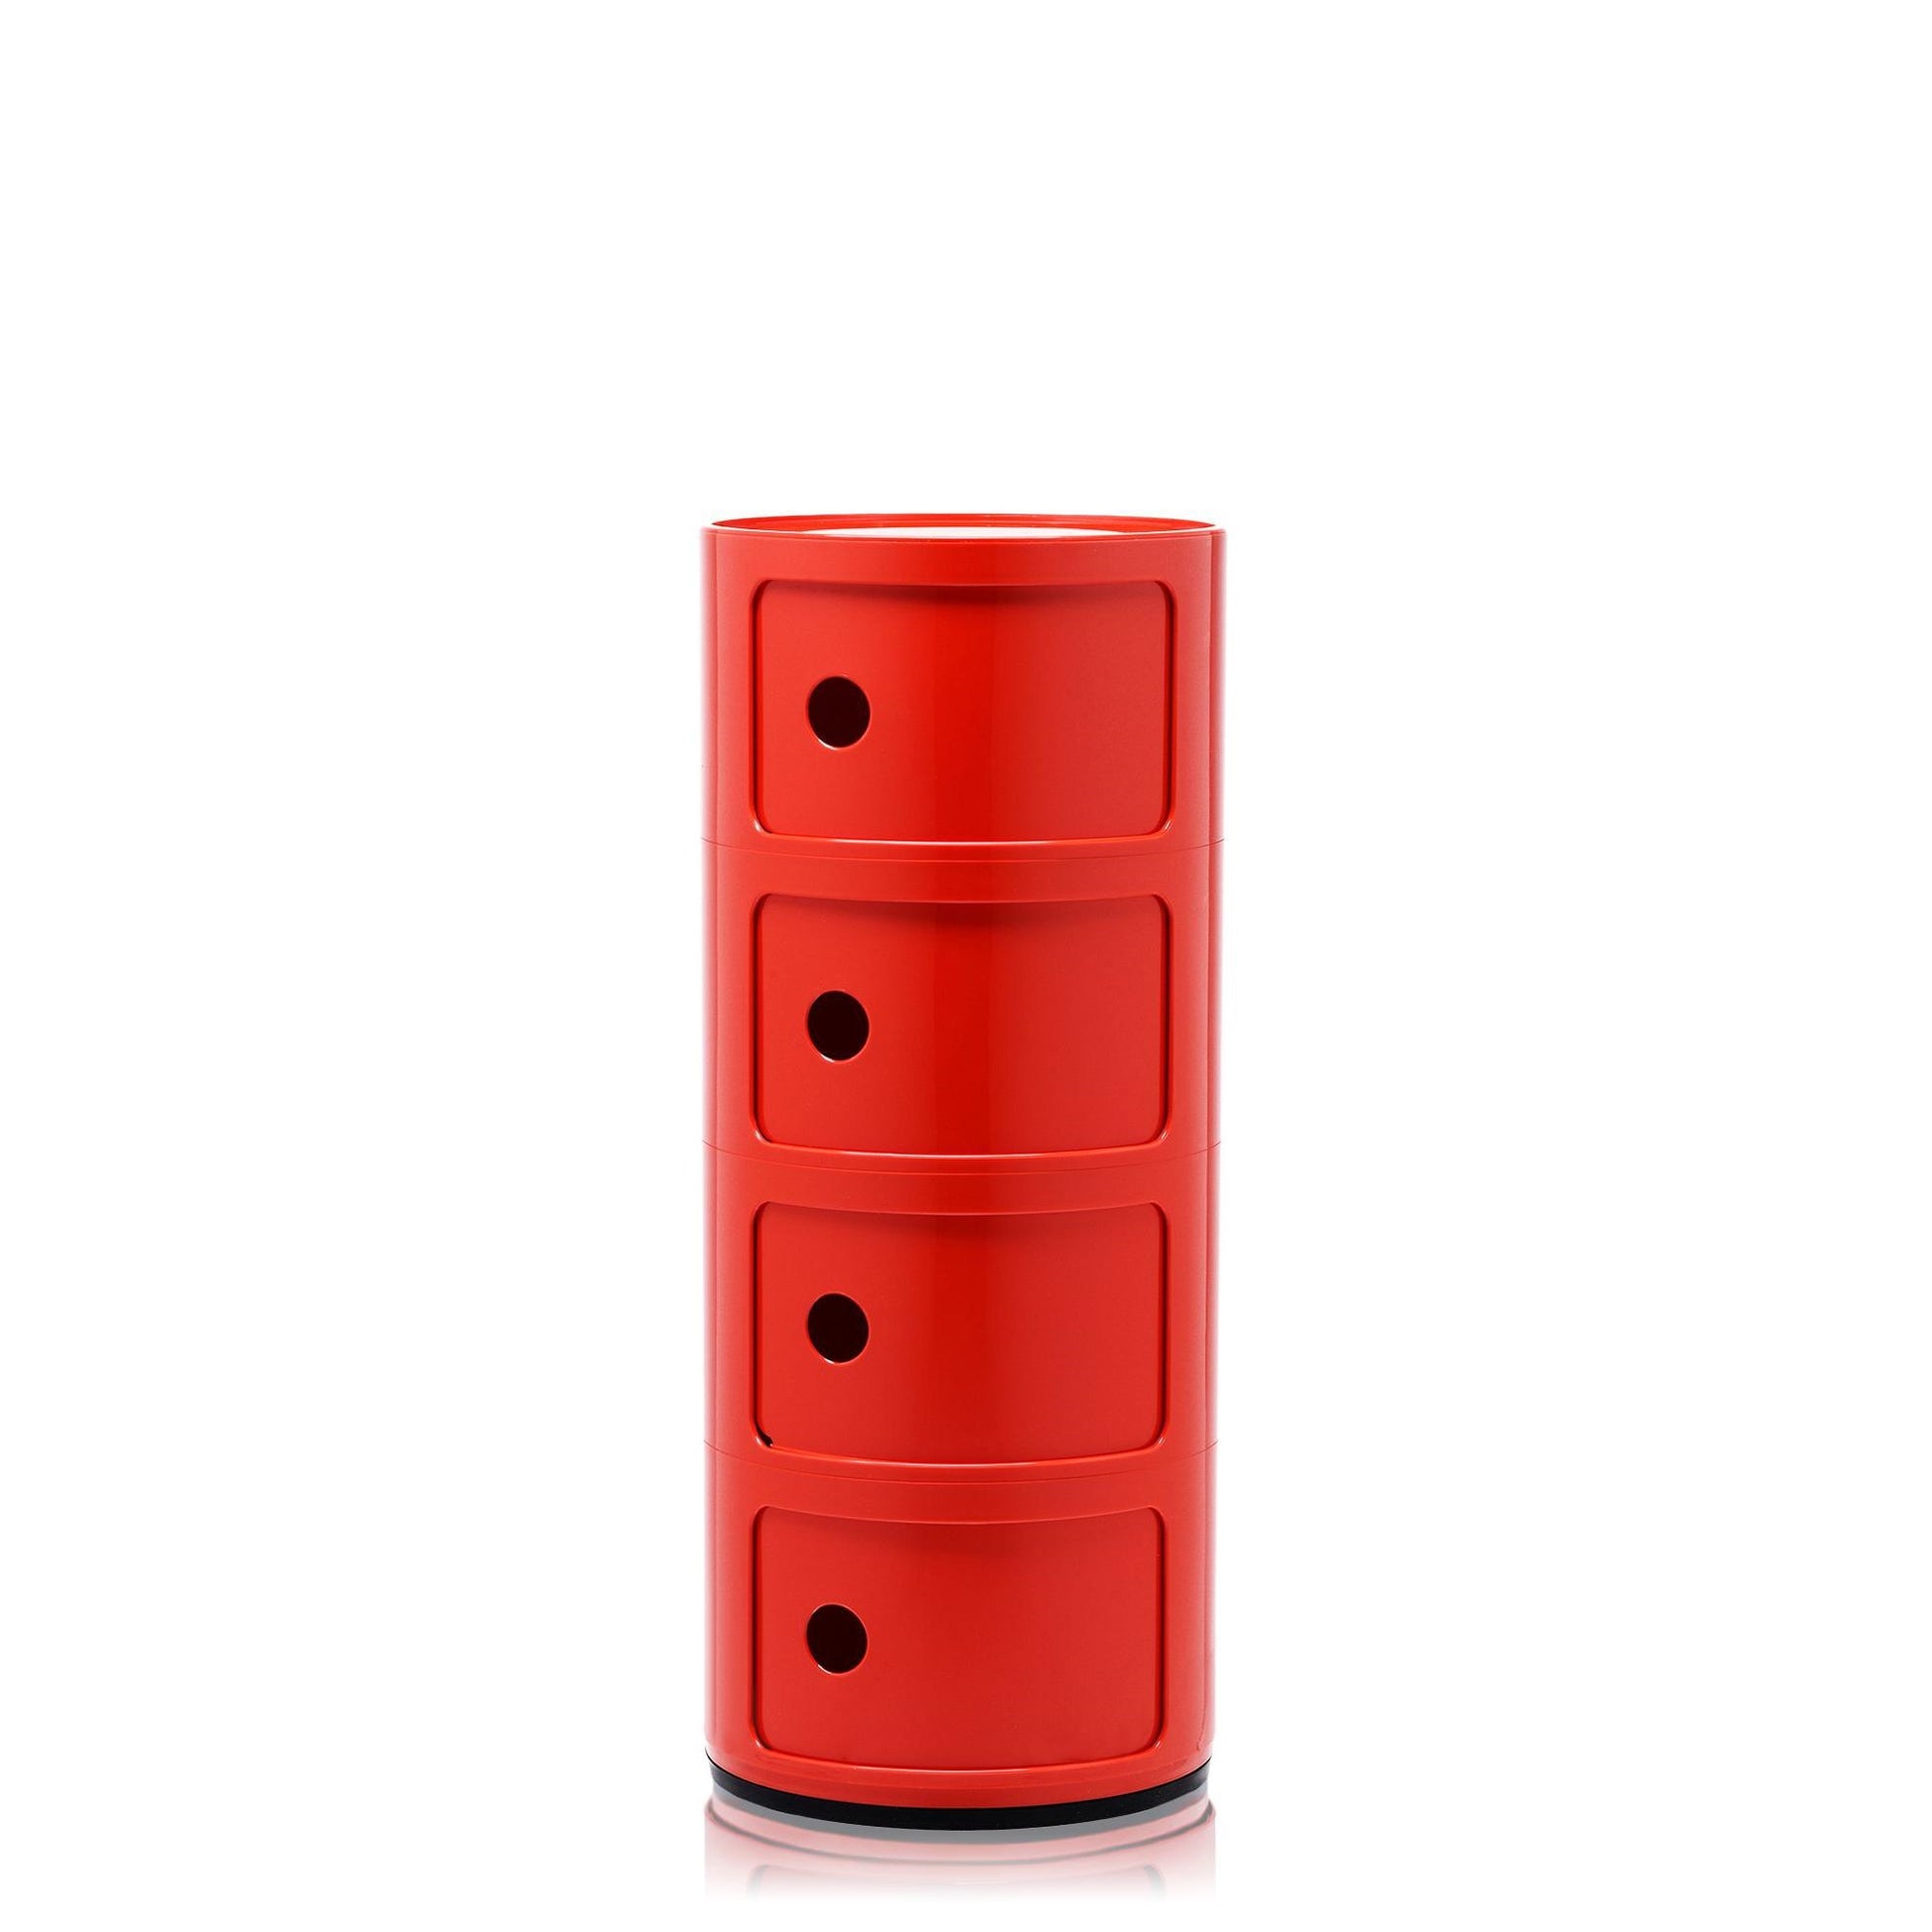 Componibili 4 Cabinet by Kartell #Red